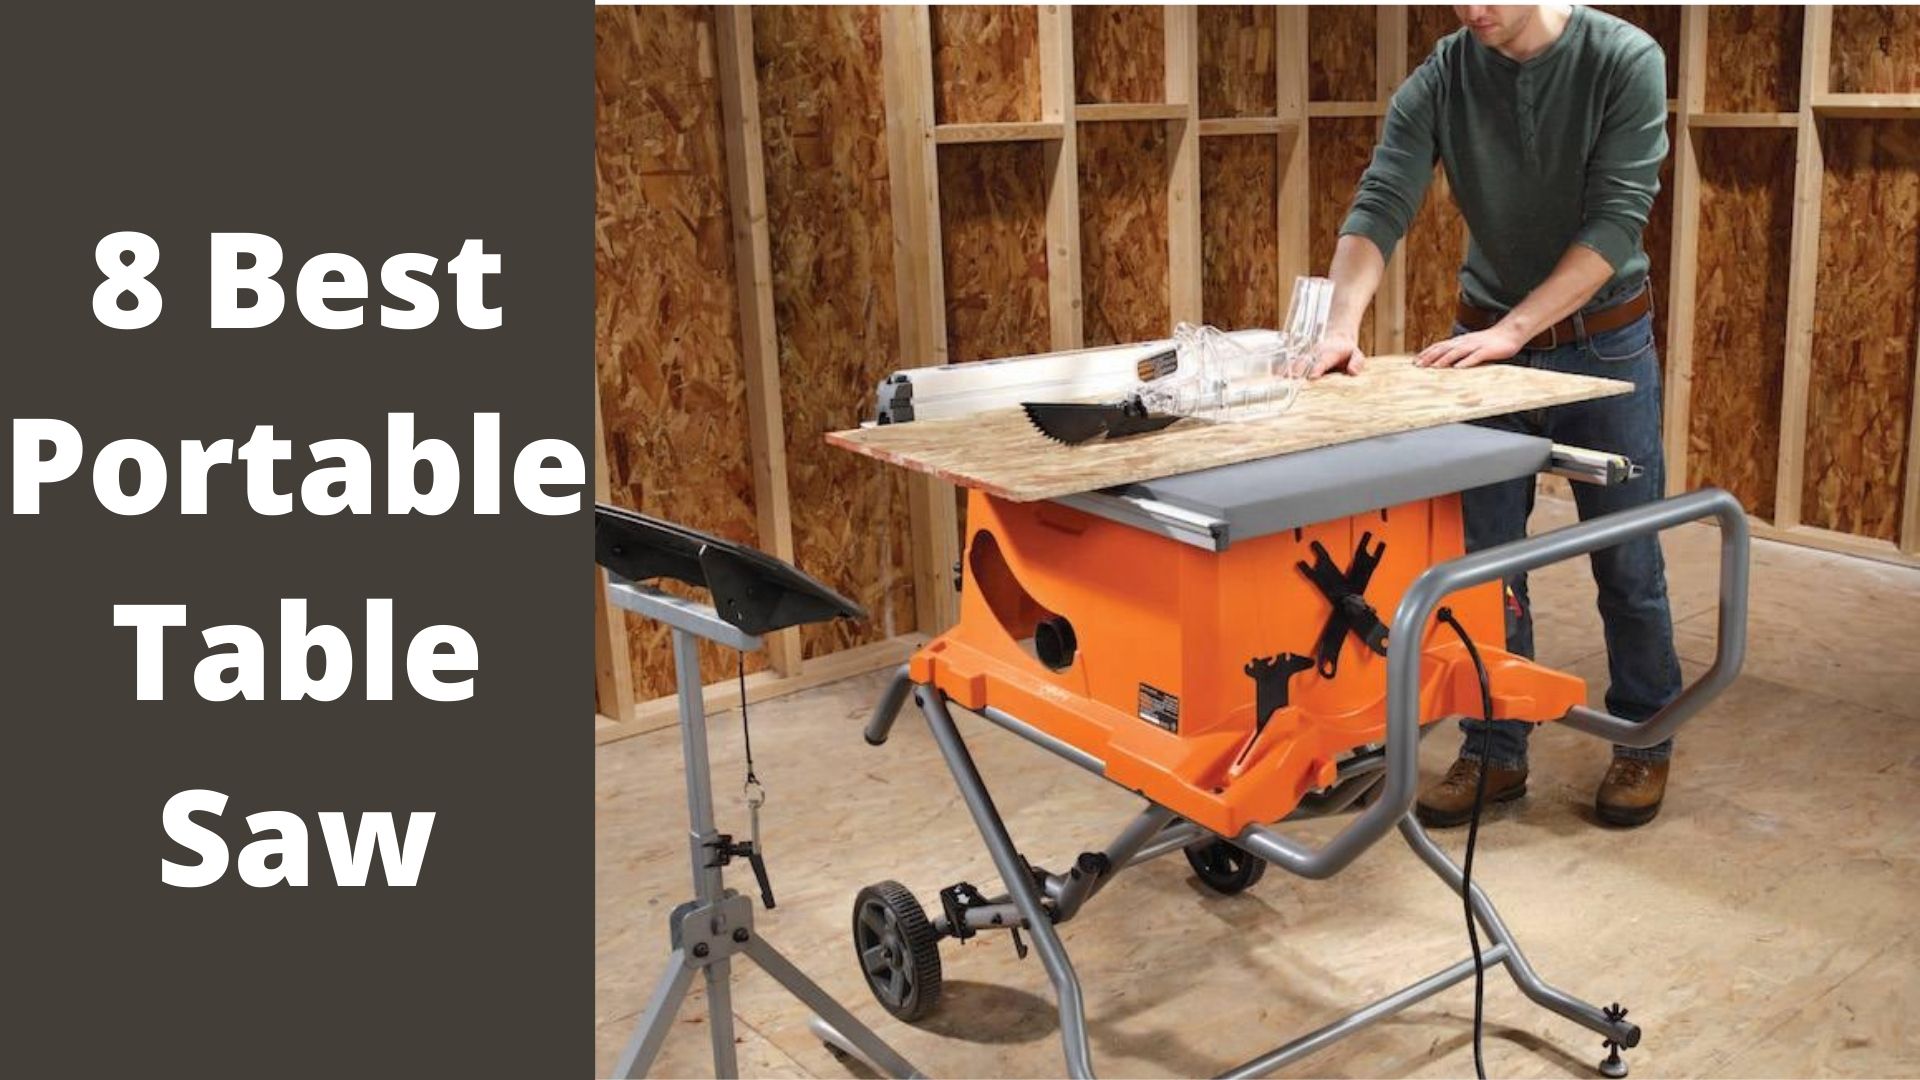 8 Best Portable Table Saw